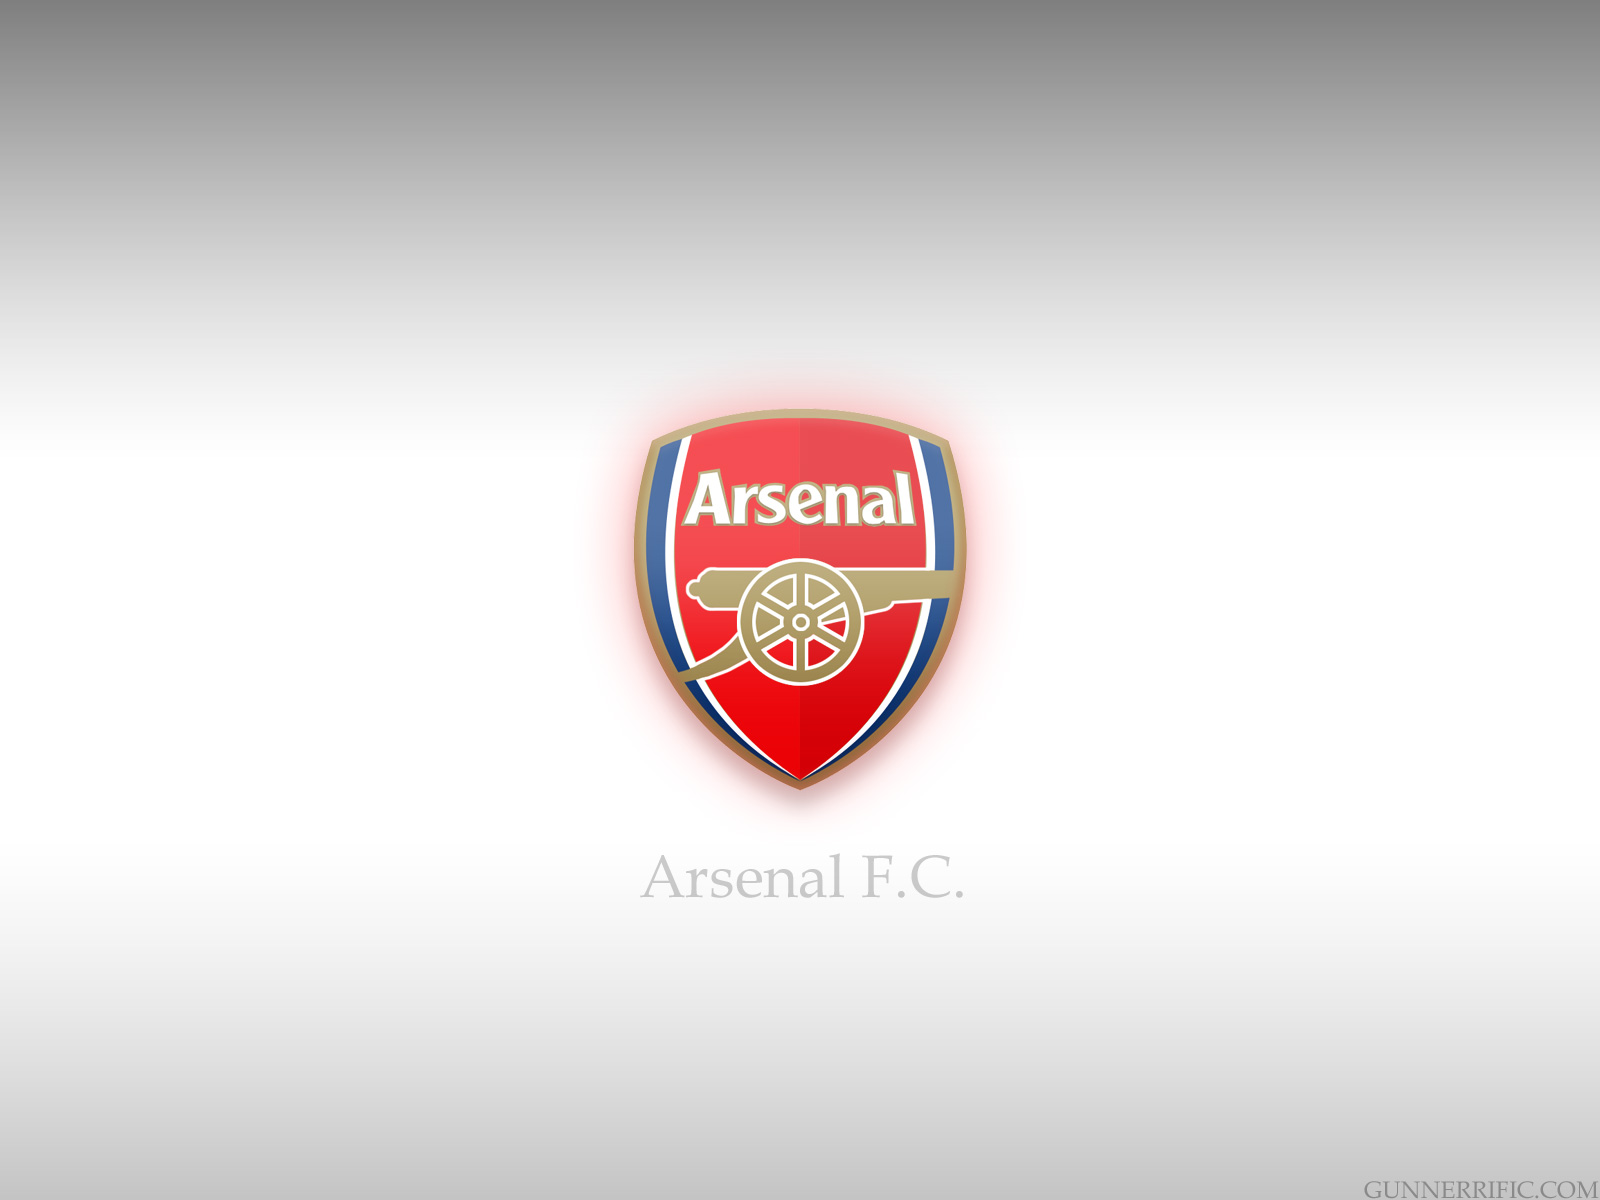 Arsenal FC Wallpaper And Windows 10 Theme | All For Windows 10 Free